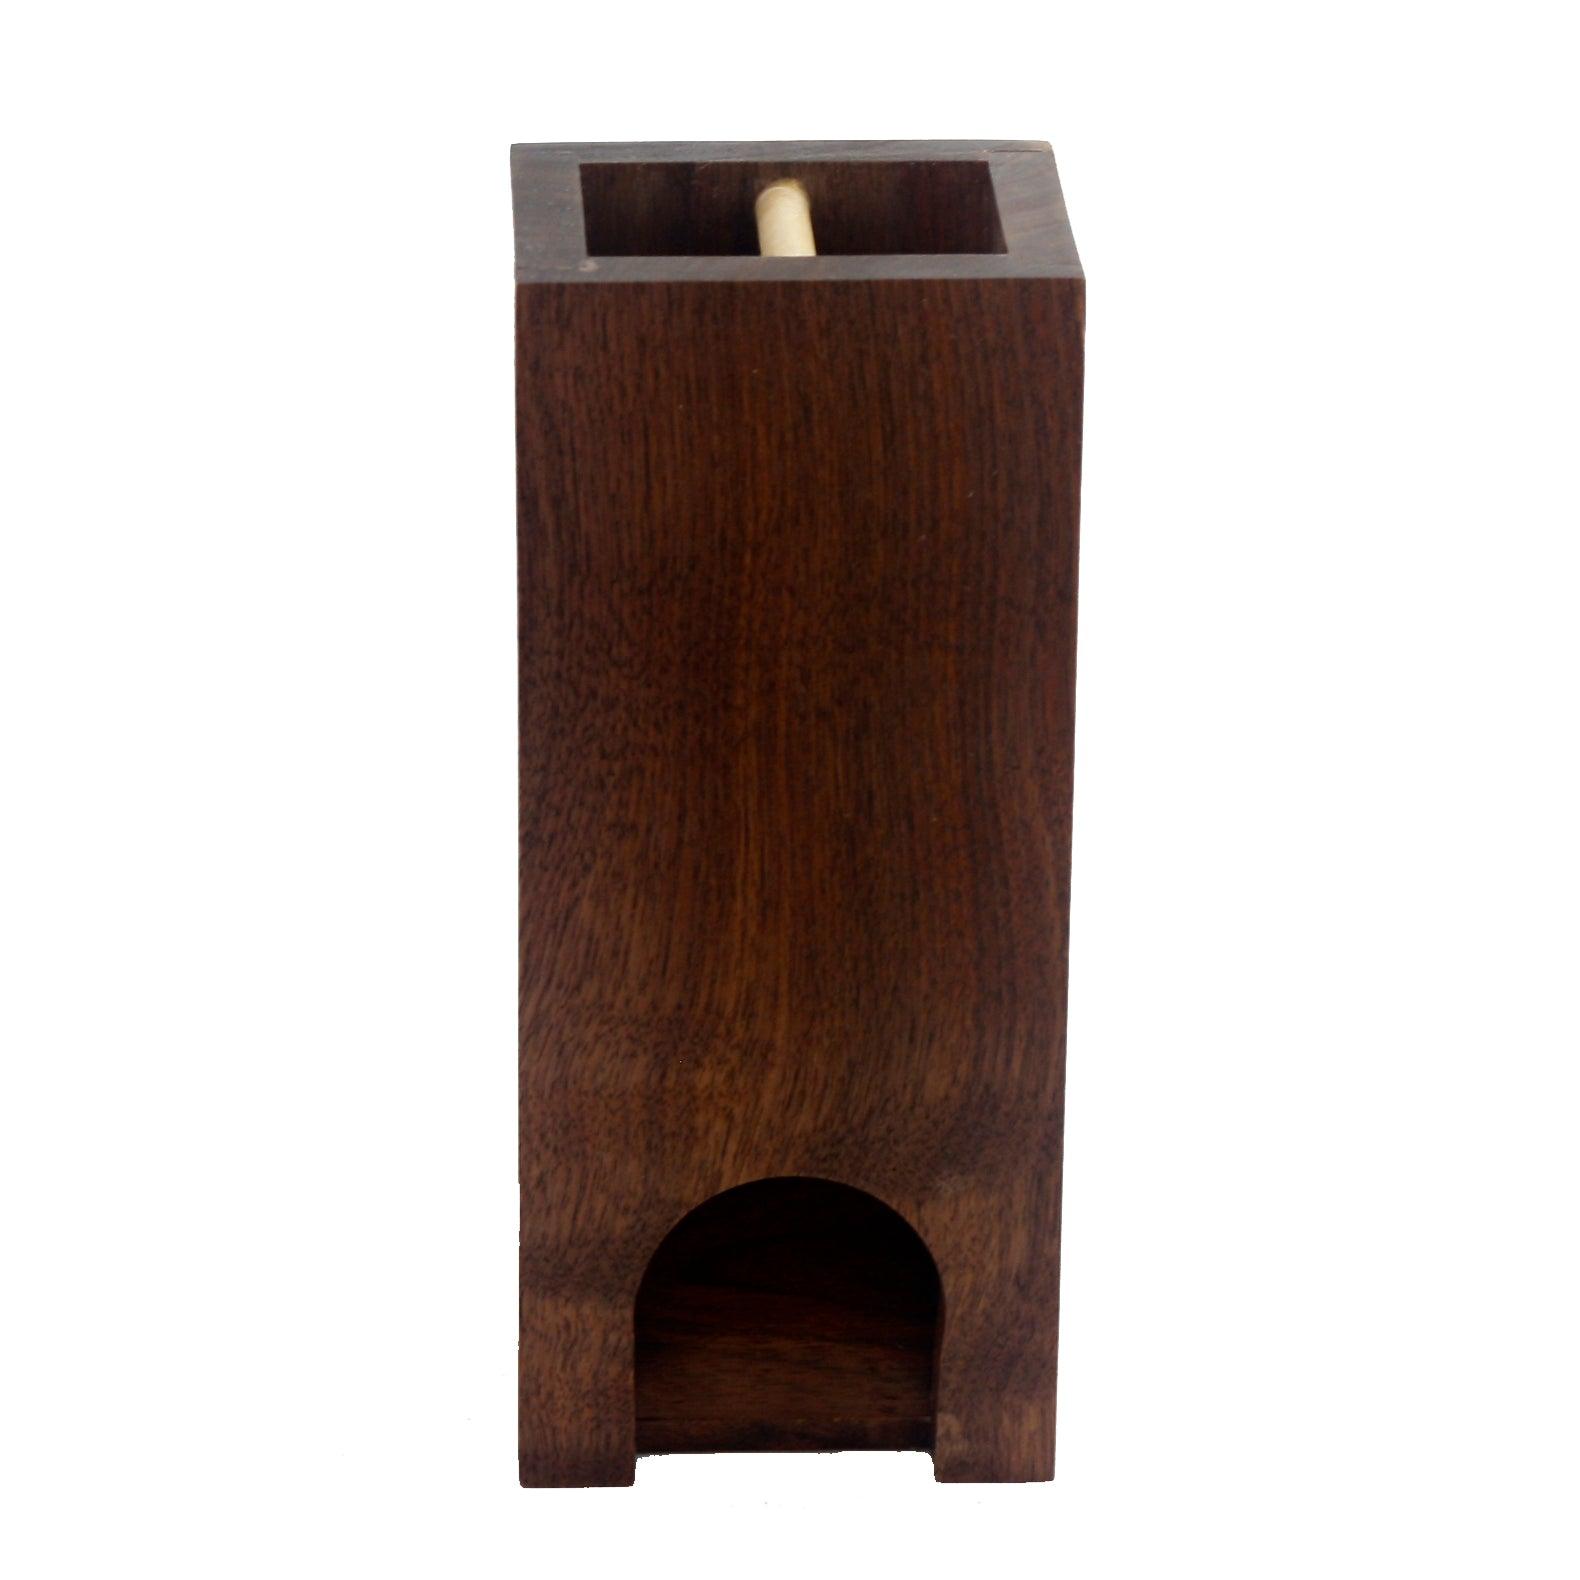 Premium hardwood dice tower made from all walnut.